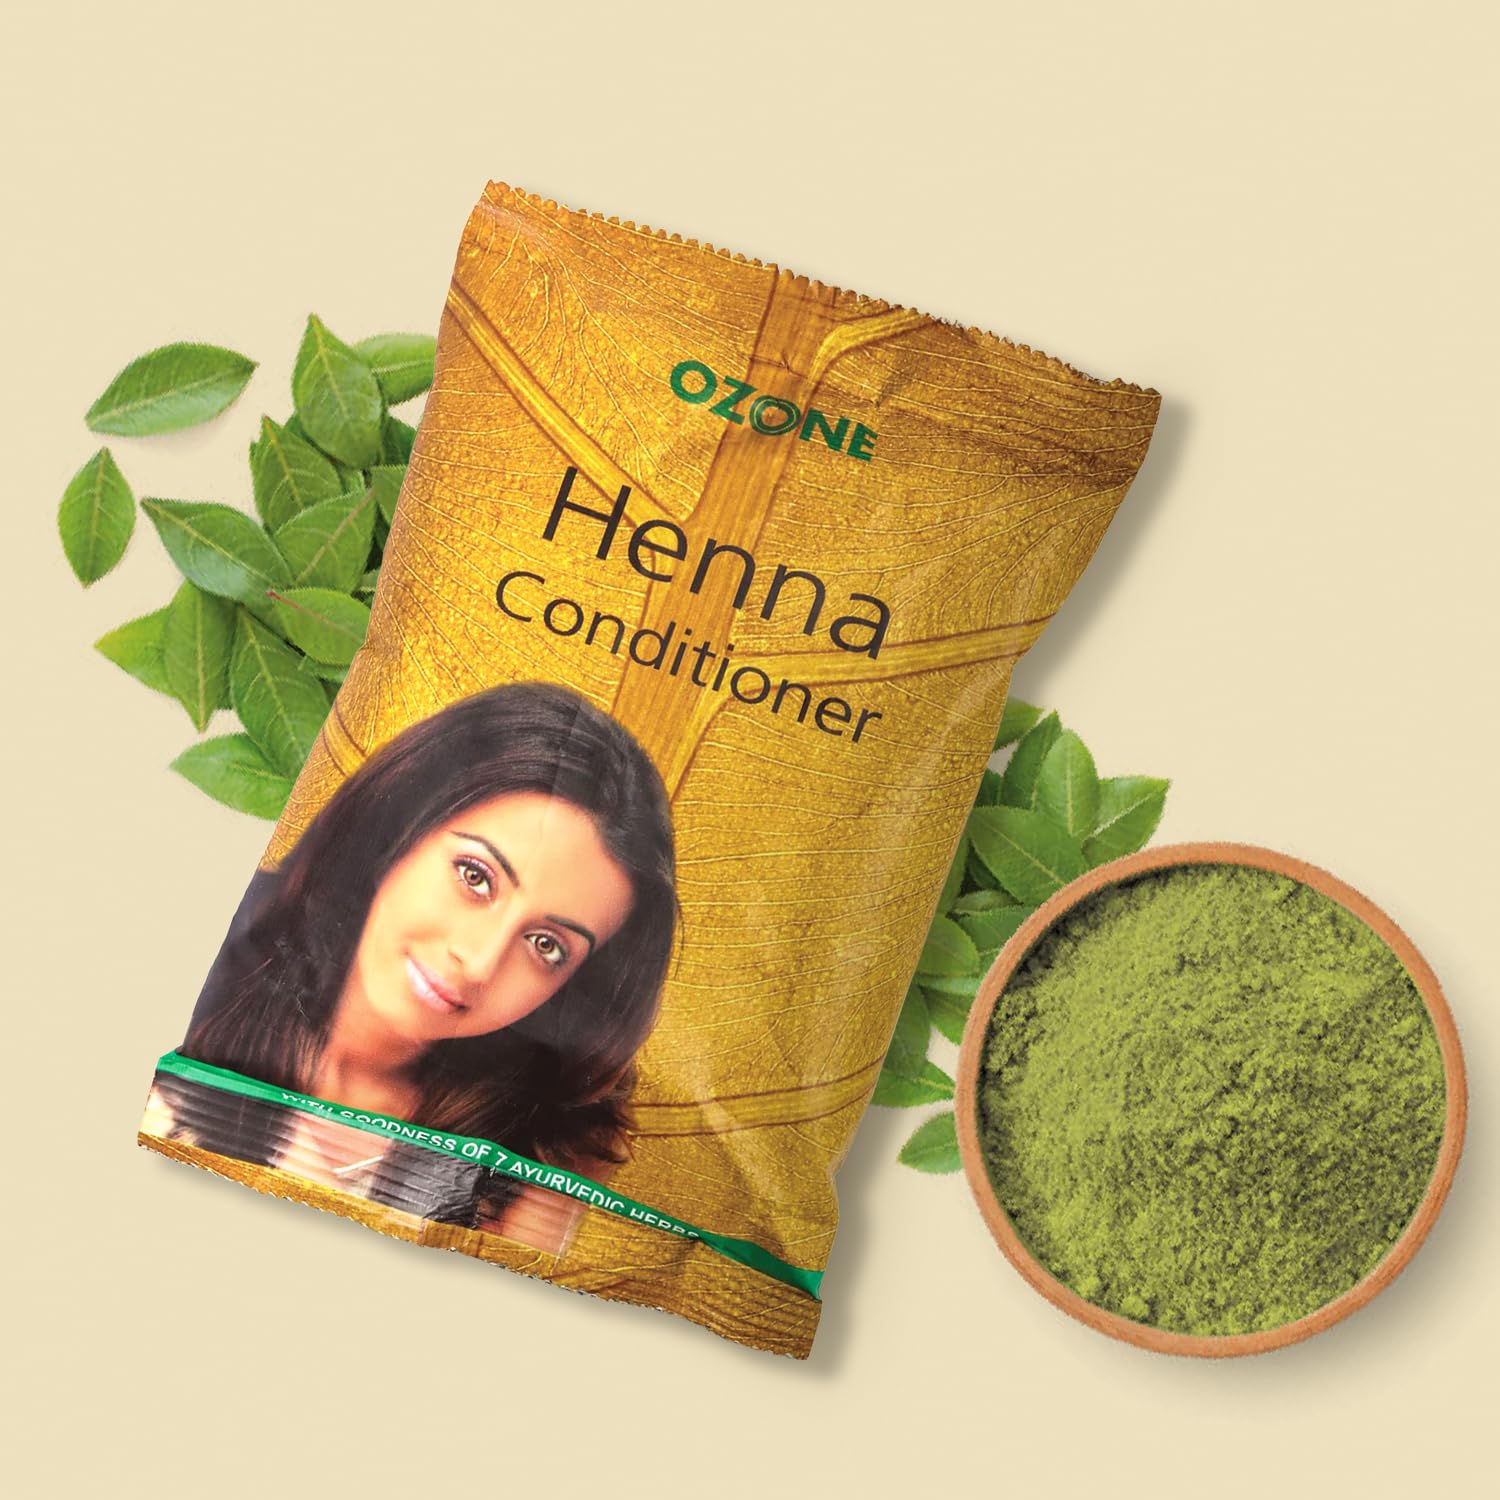 OZONE Henna(Mehndi)Hair Conditioner|Henna Powder For Men&Women|Ideal For Strong Healthy Hair,Hair Fall Control,Damaged Hair,Shine&Nourish The Hair|Paraben,Chemical&Sulphate Free-100 G(Pack Of 6)  from Ozone